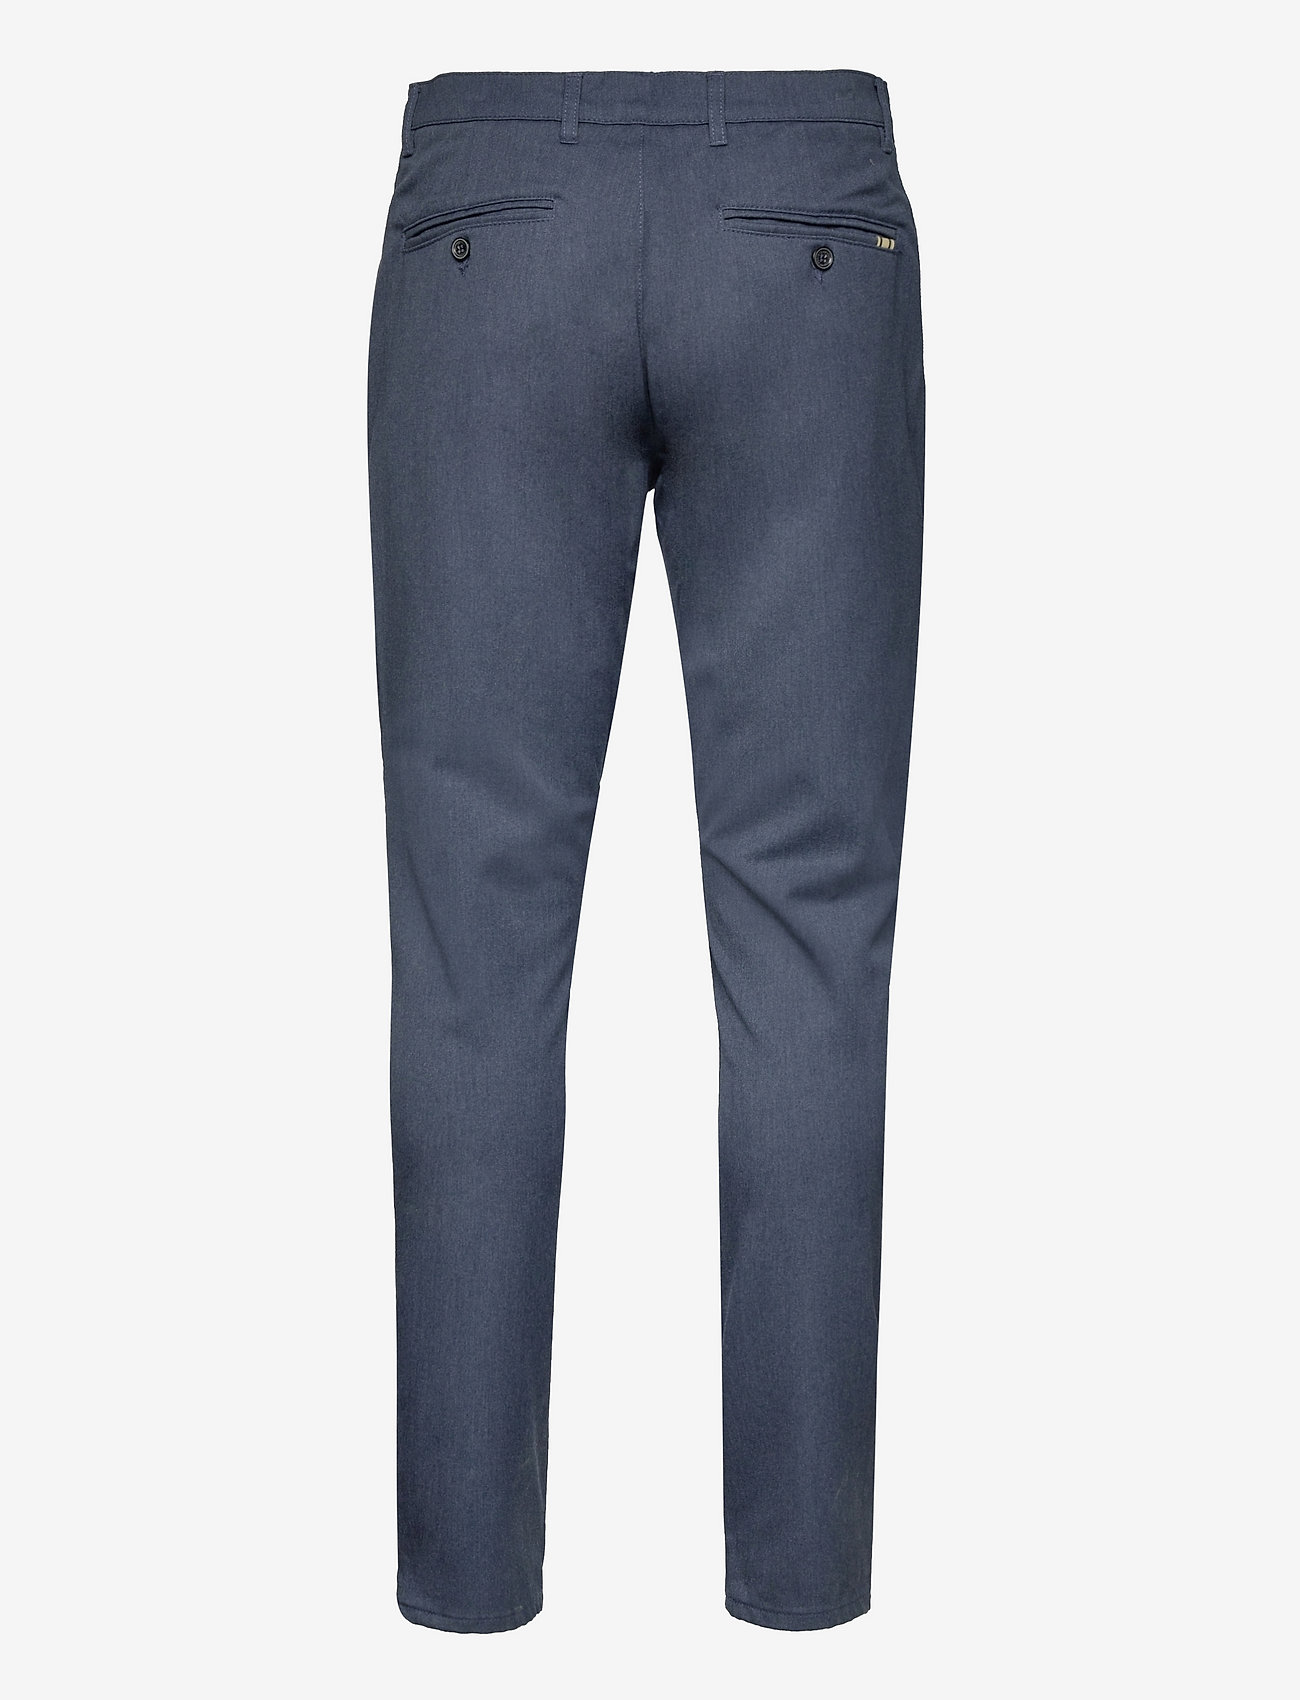 Solid - SDFREDERIC - chinos - ombre blu - 1